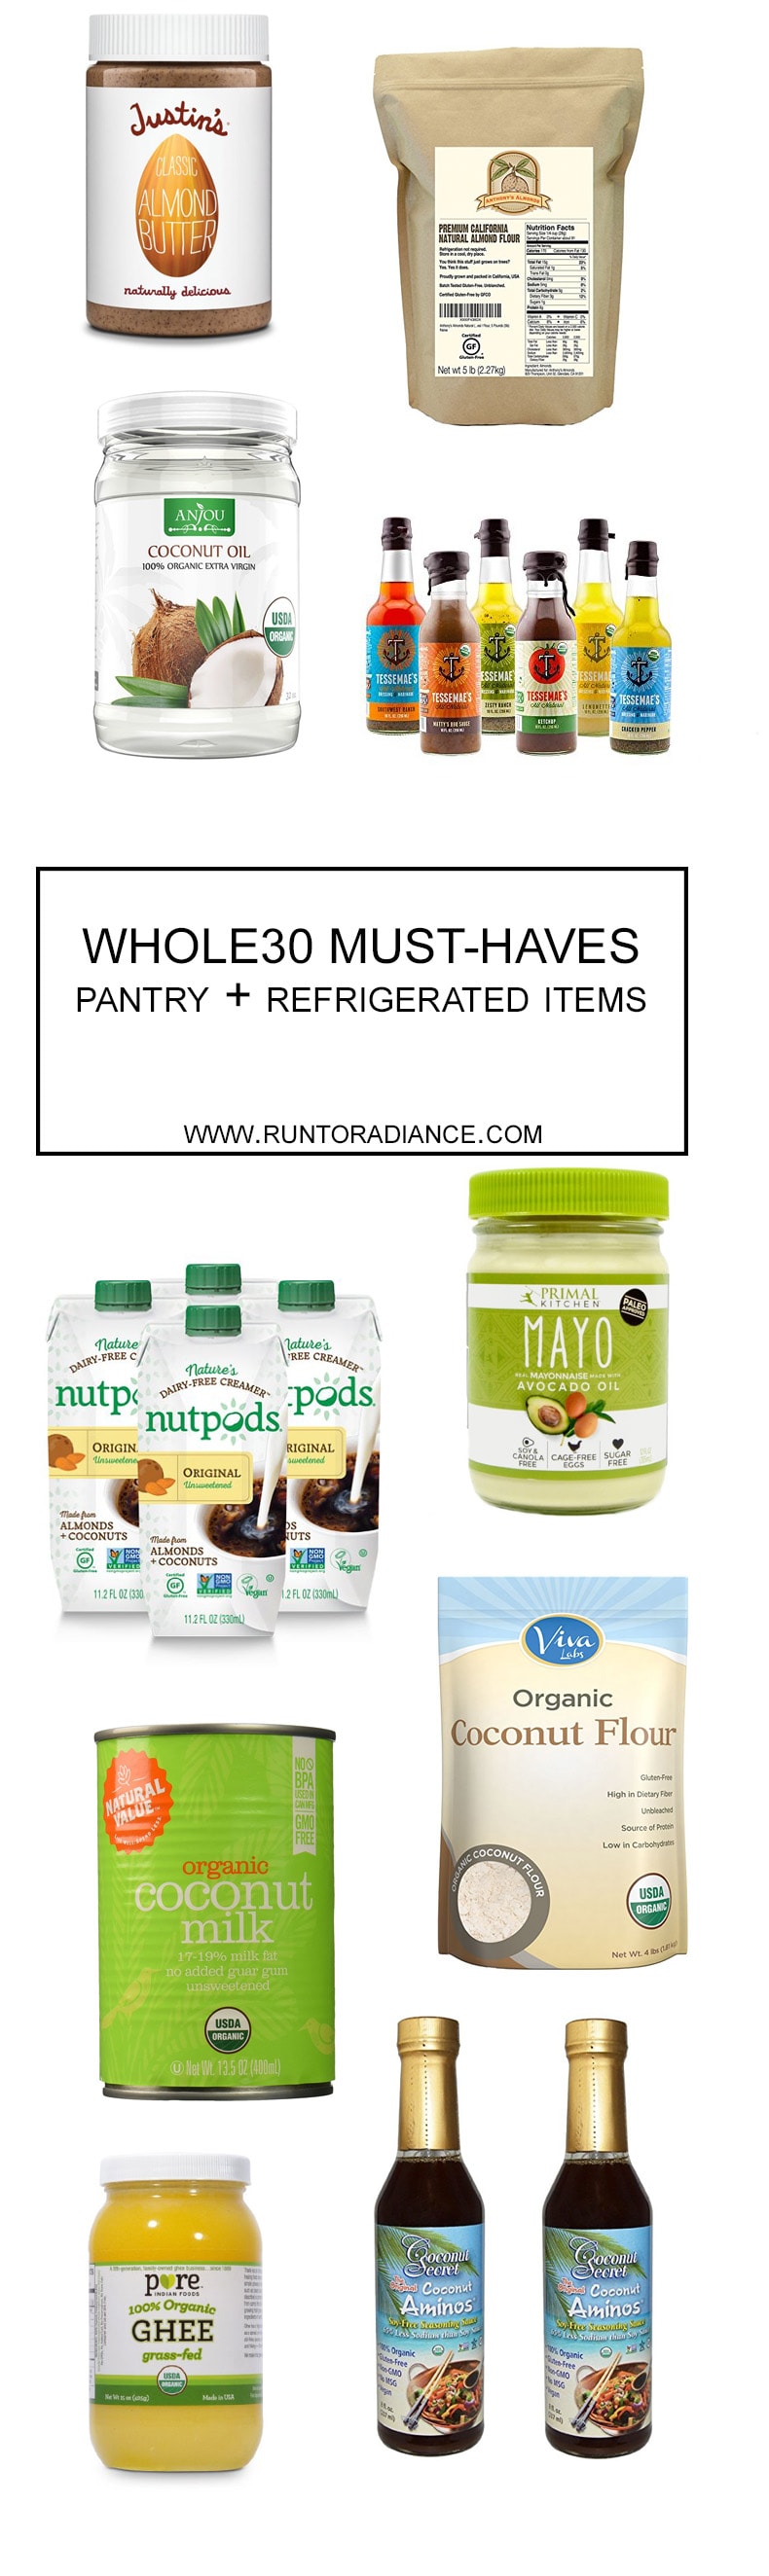 I want try a Whole30 on January 1st — this post is awesome! It shows you exactly what you need to stock up on to have a successful Whole30. Whole30 must-haves, woo hoo.